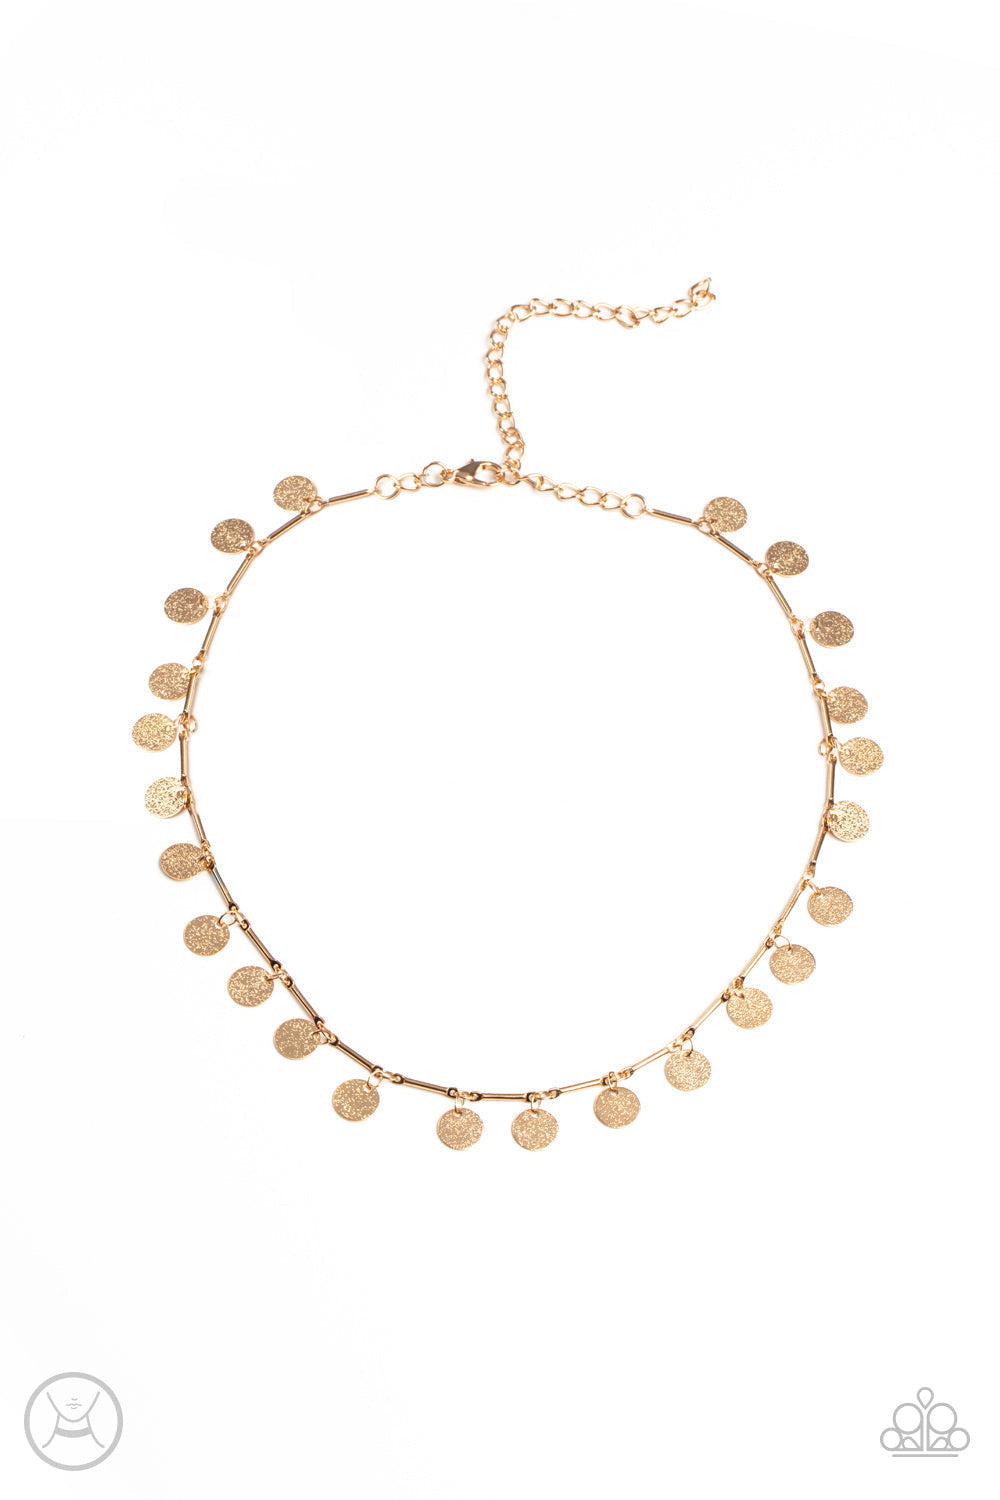 Musically Minimalist Gold Necklace - Paparazzi Accessories- lightbox - CarasShop.com - $5 Jewelry by Cara Jewels